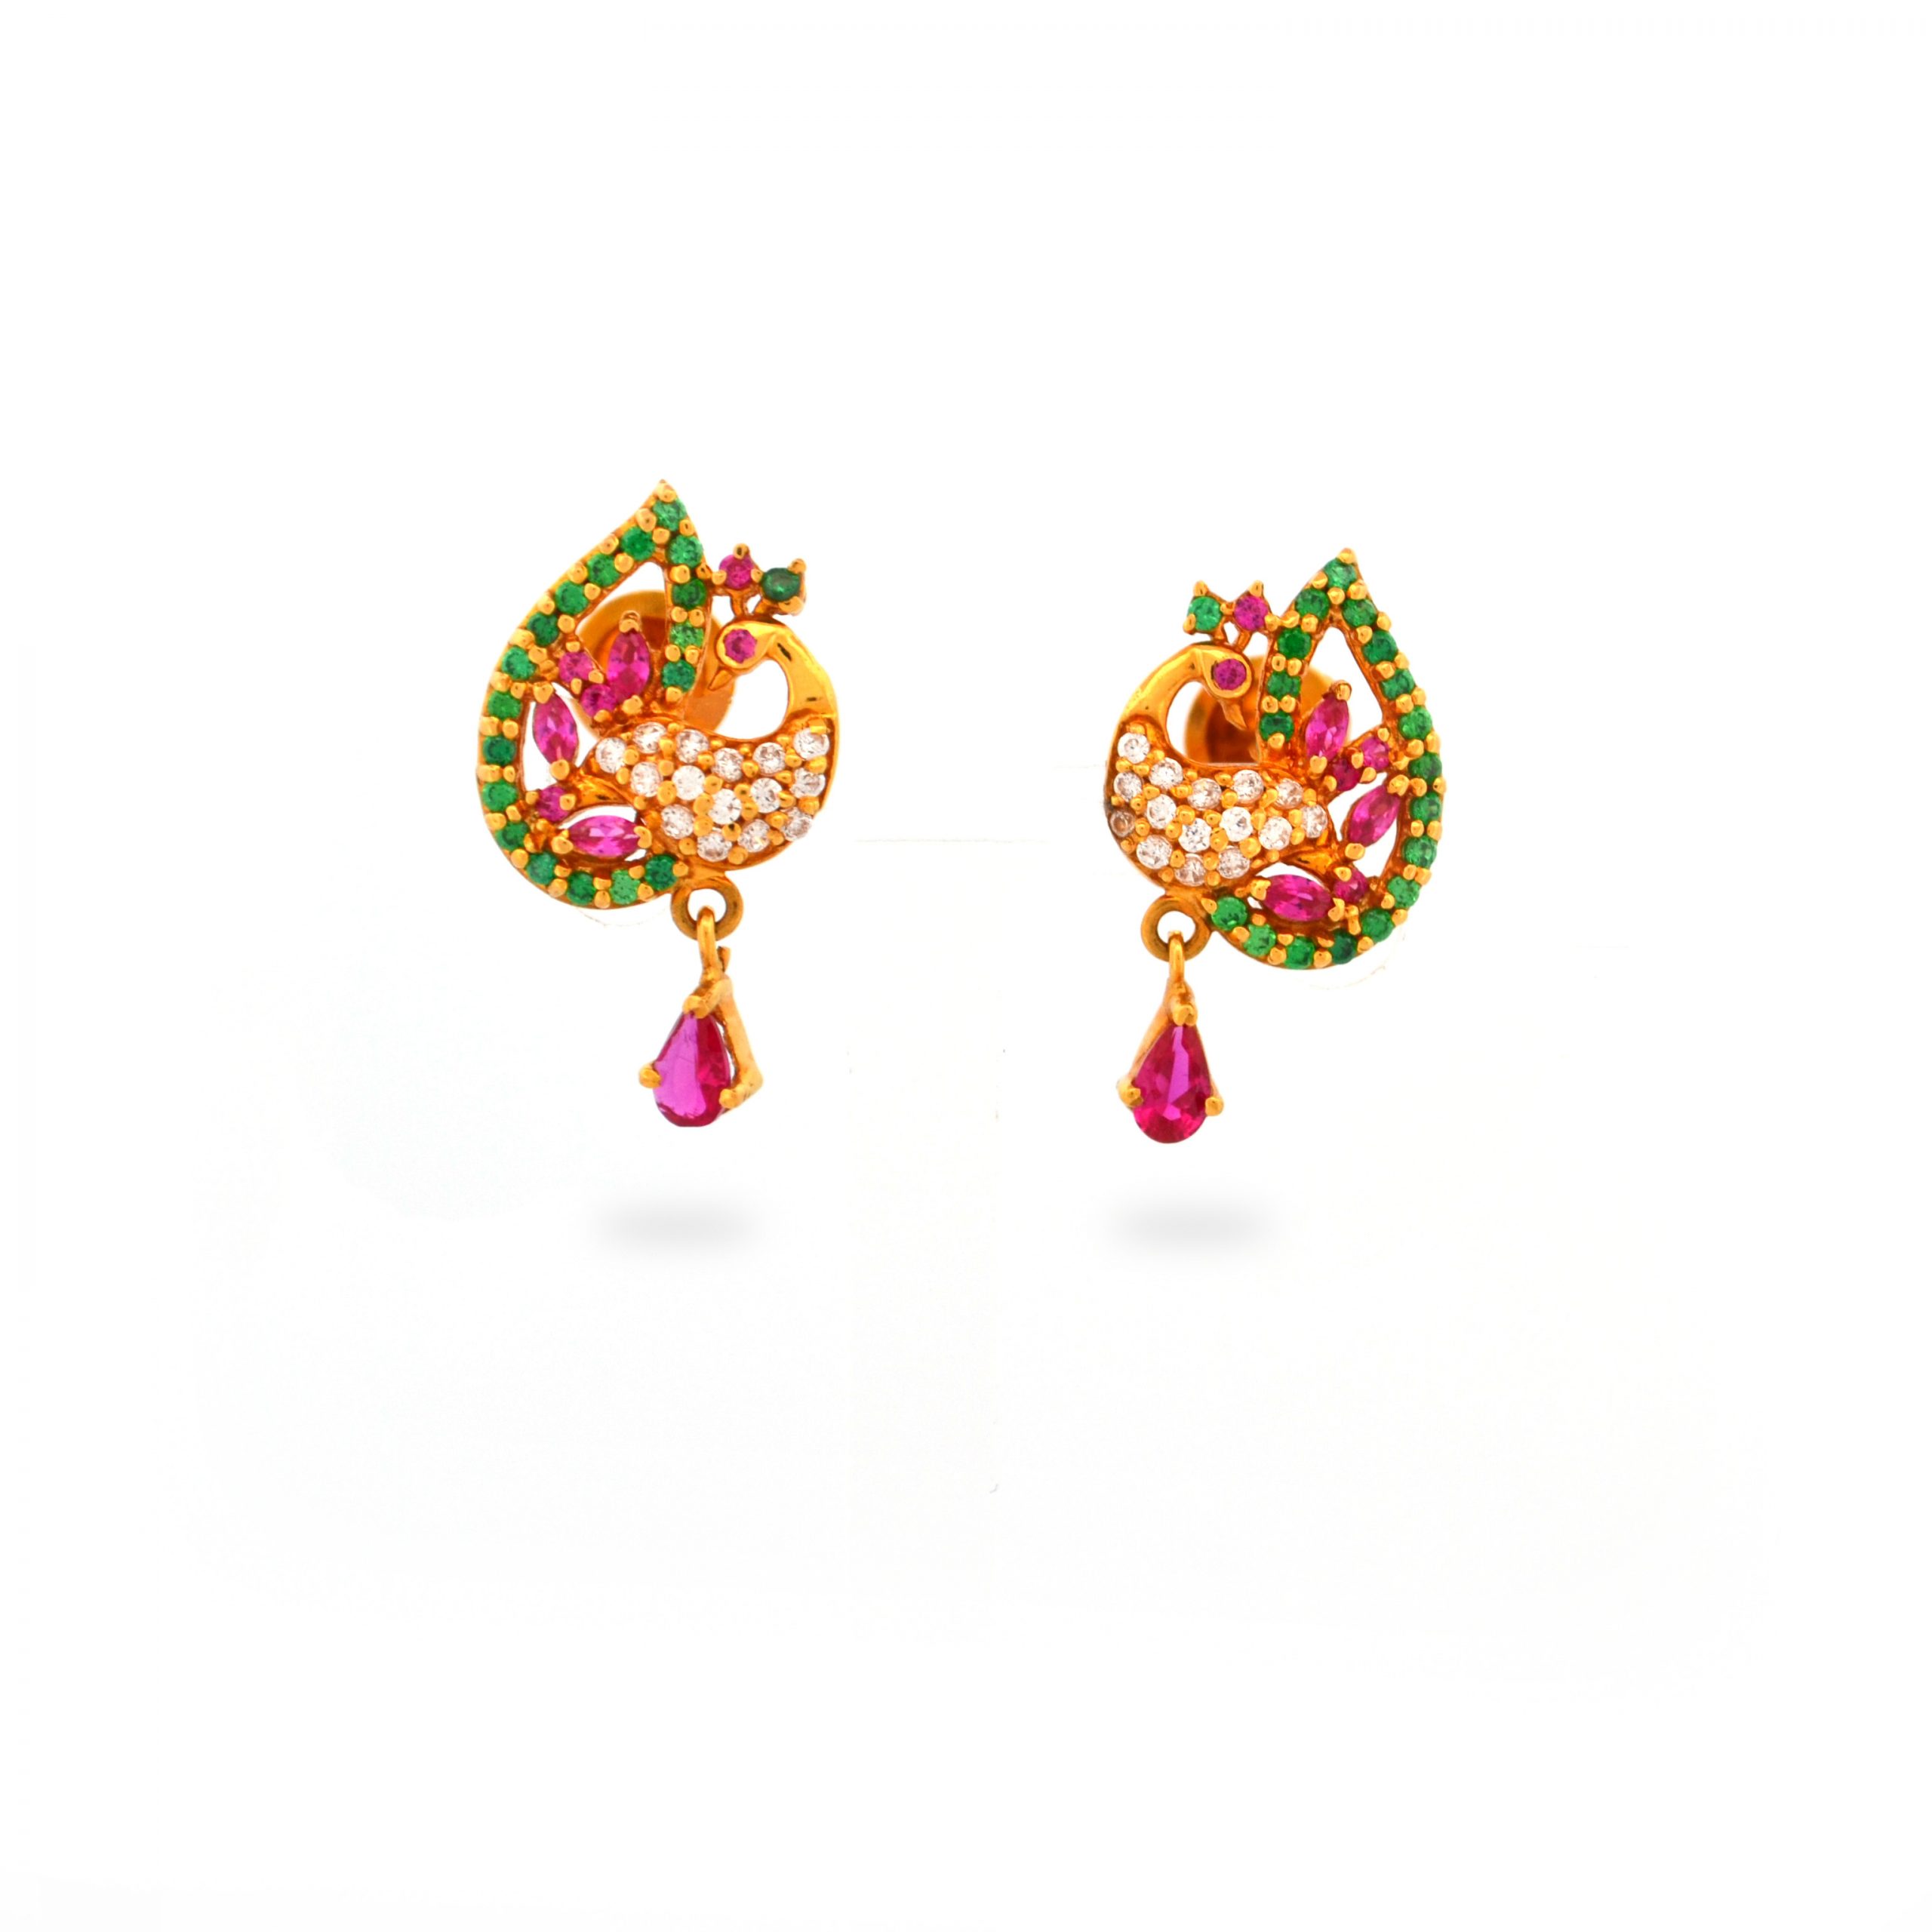 Details more than 191 lalitha jewellery earrings models